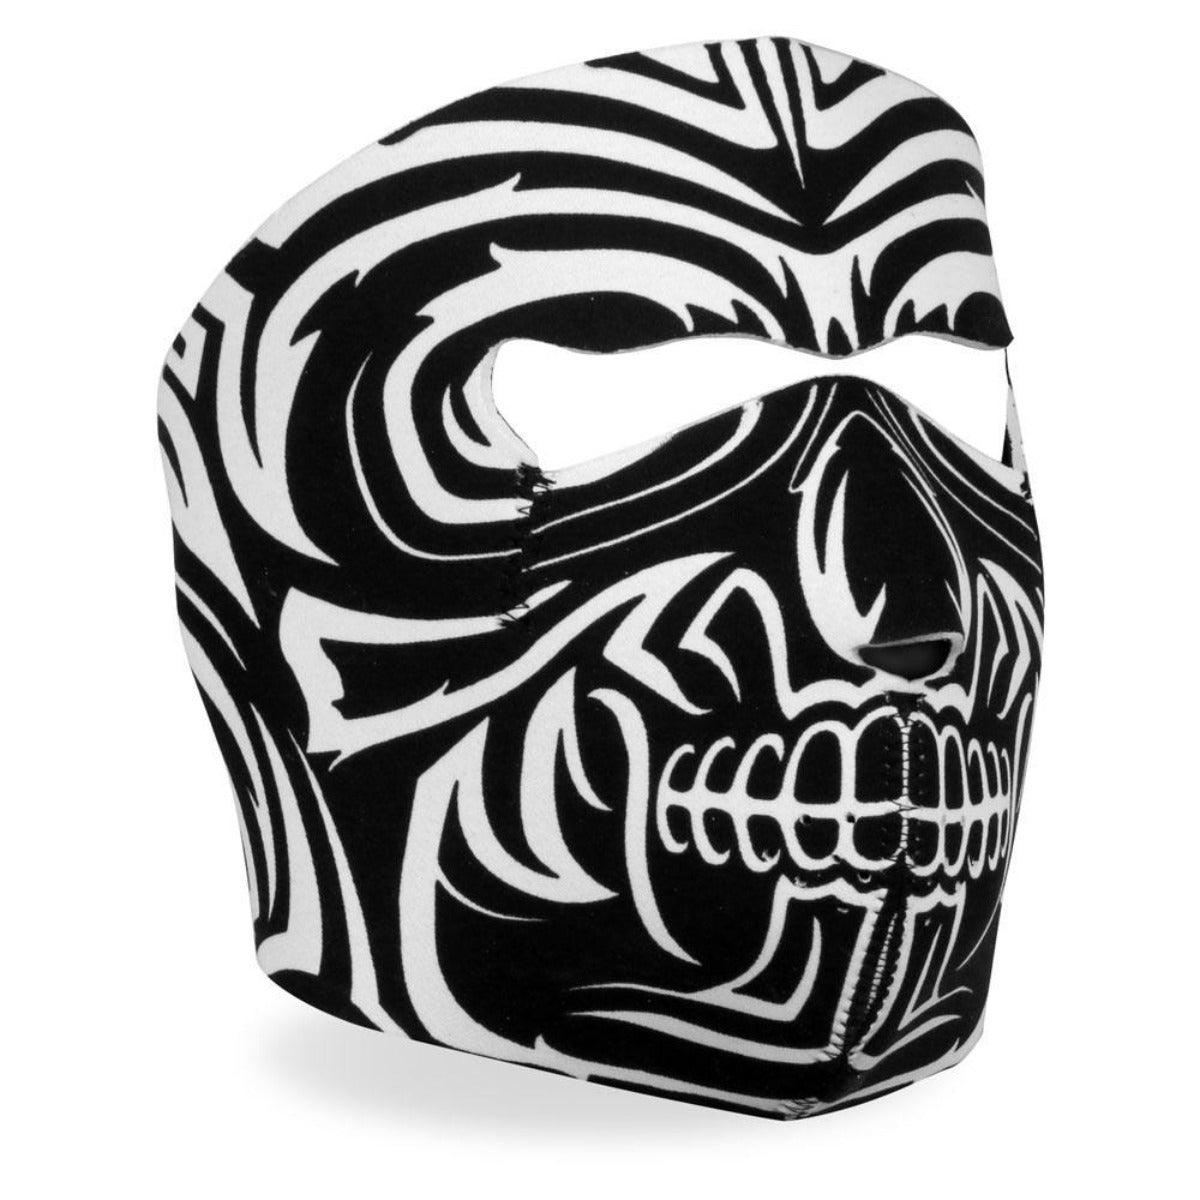 Hot Leathers Design Skull Facemask - American Legend Rider